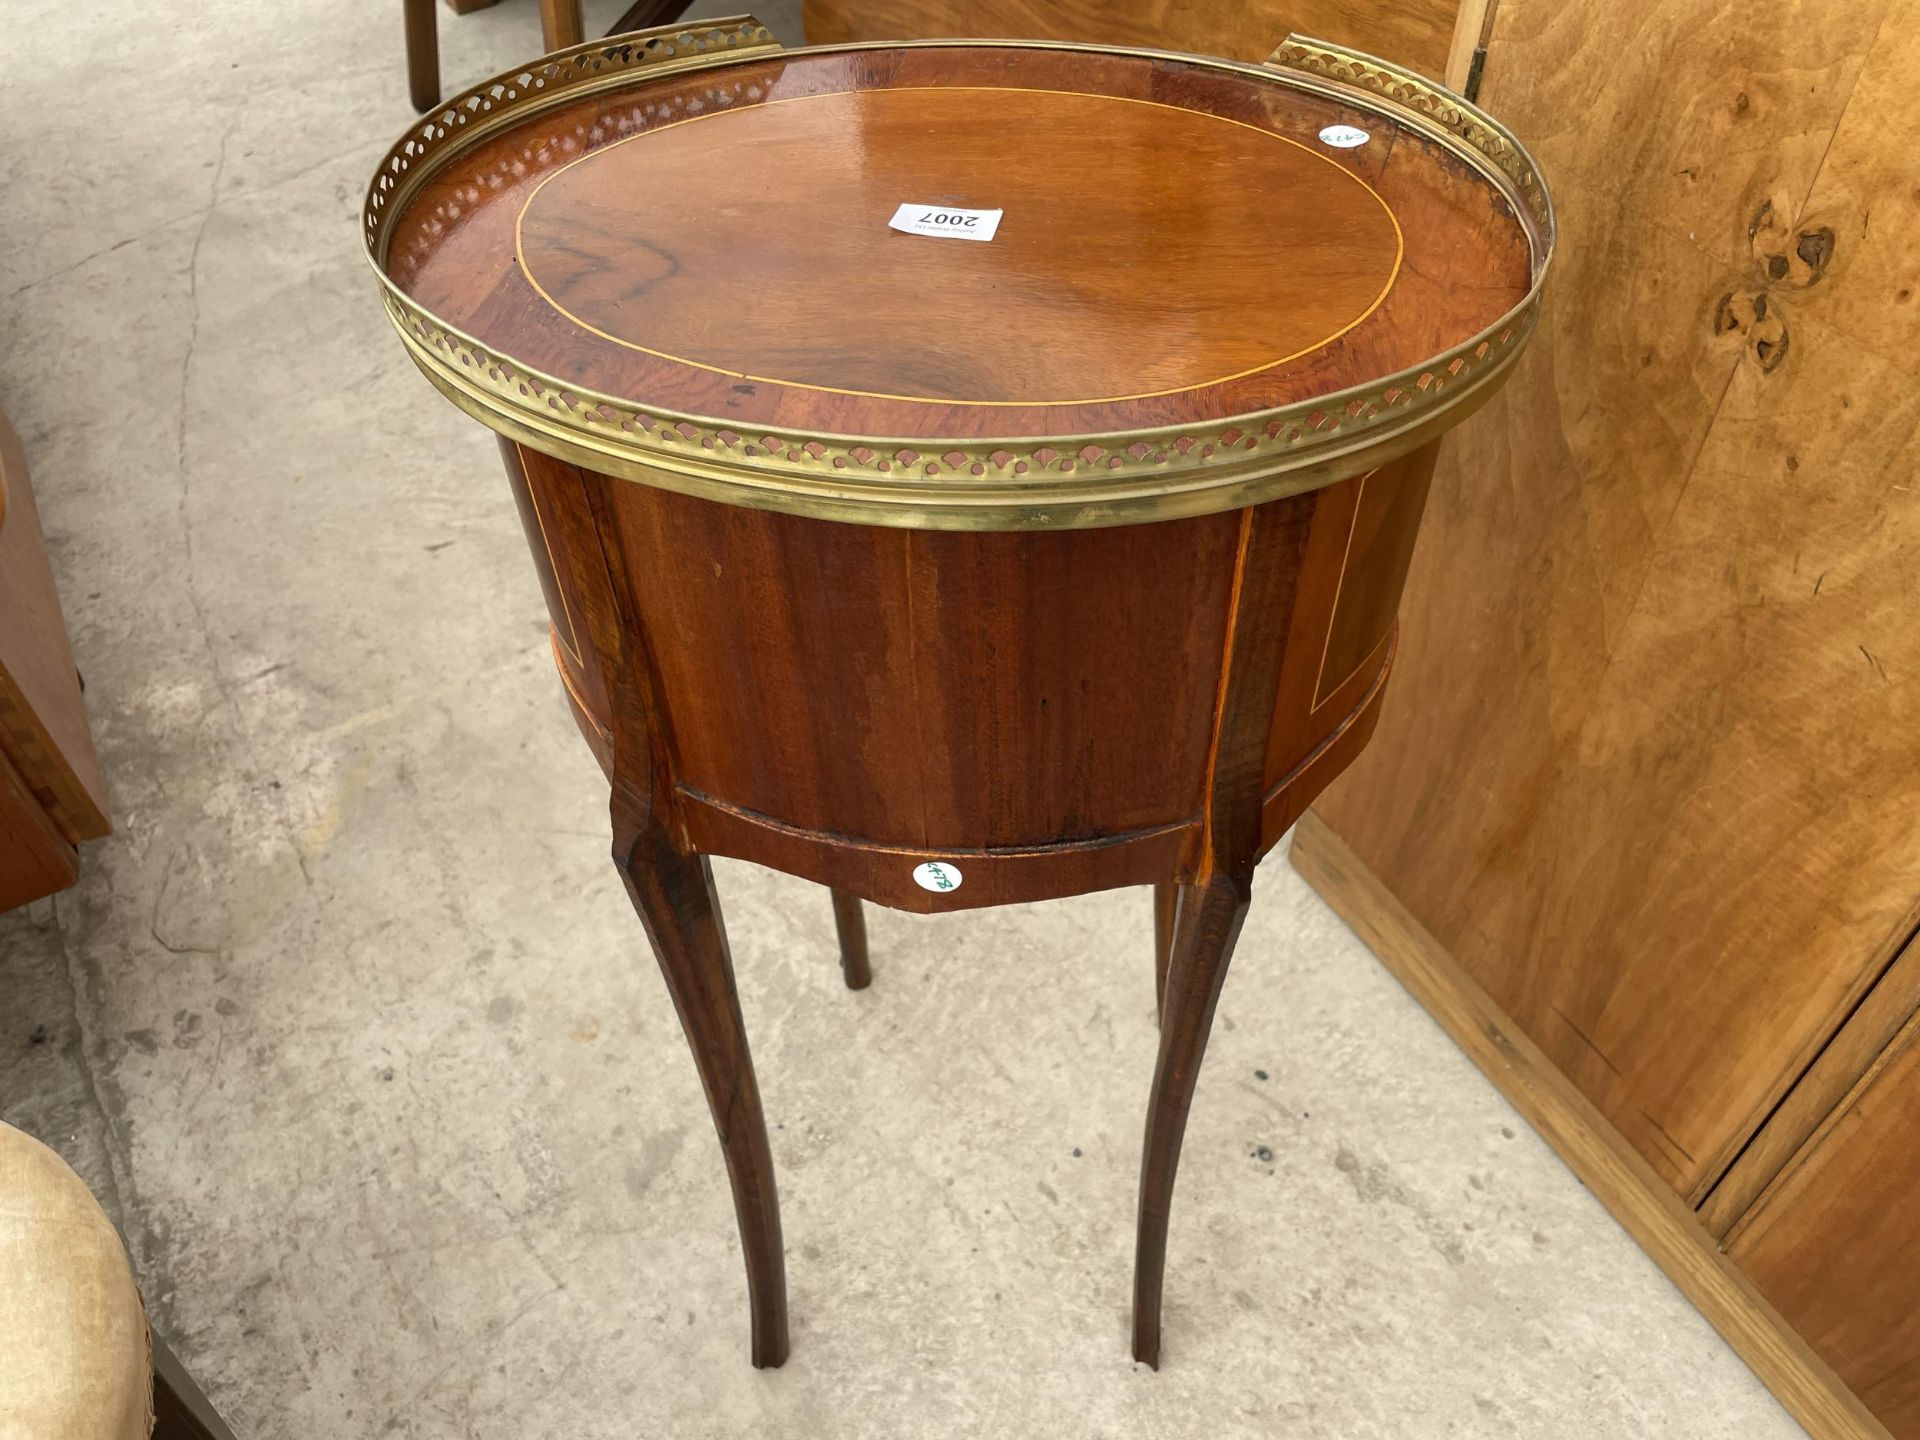 AN OVAL LOUIS XVI STYLE WALNUT SIDE TABLE WITH THREE SMALL DRAWERS, BRASS PIERCED GALLERY AND - Image 6 of 6